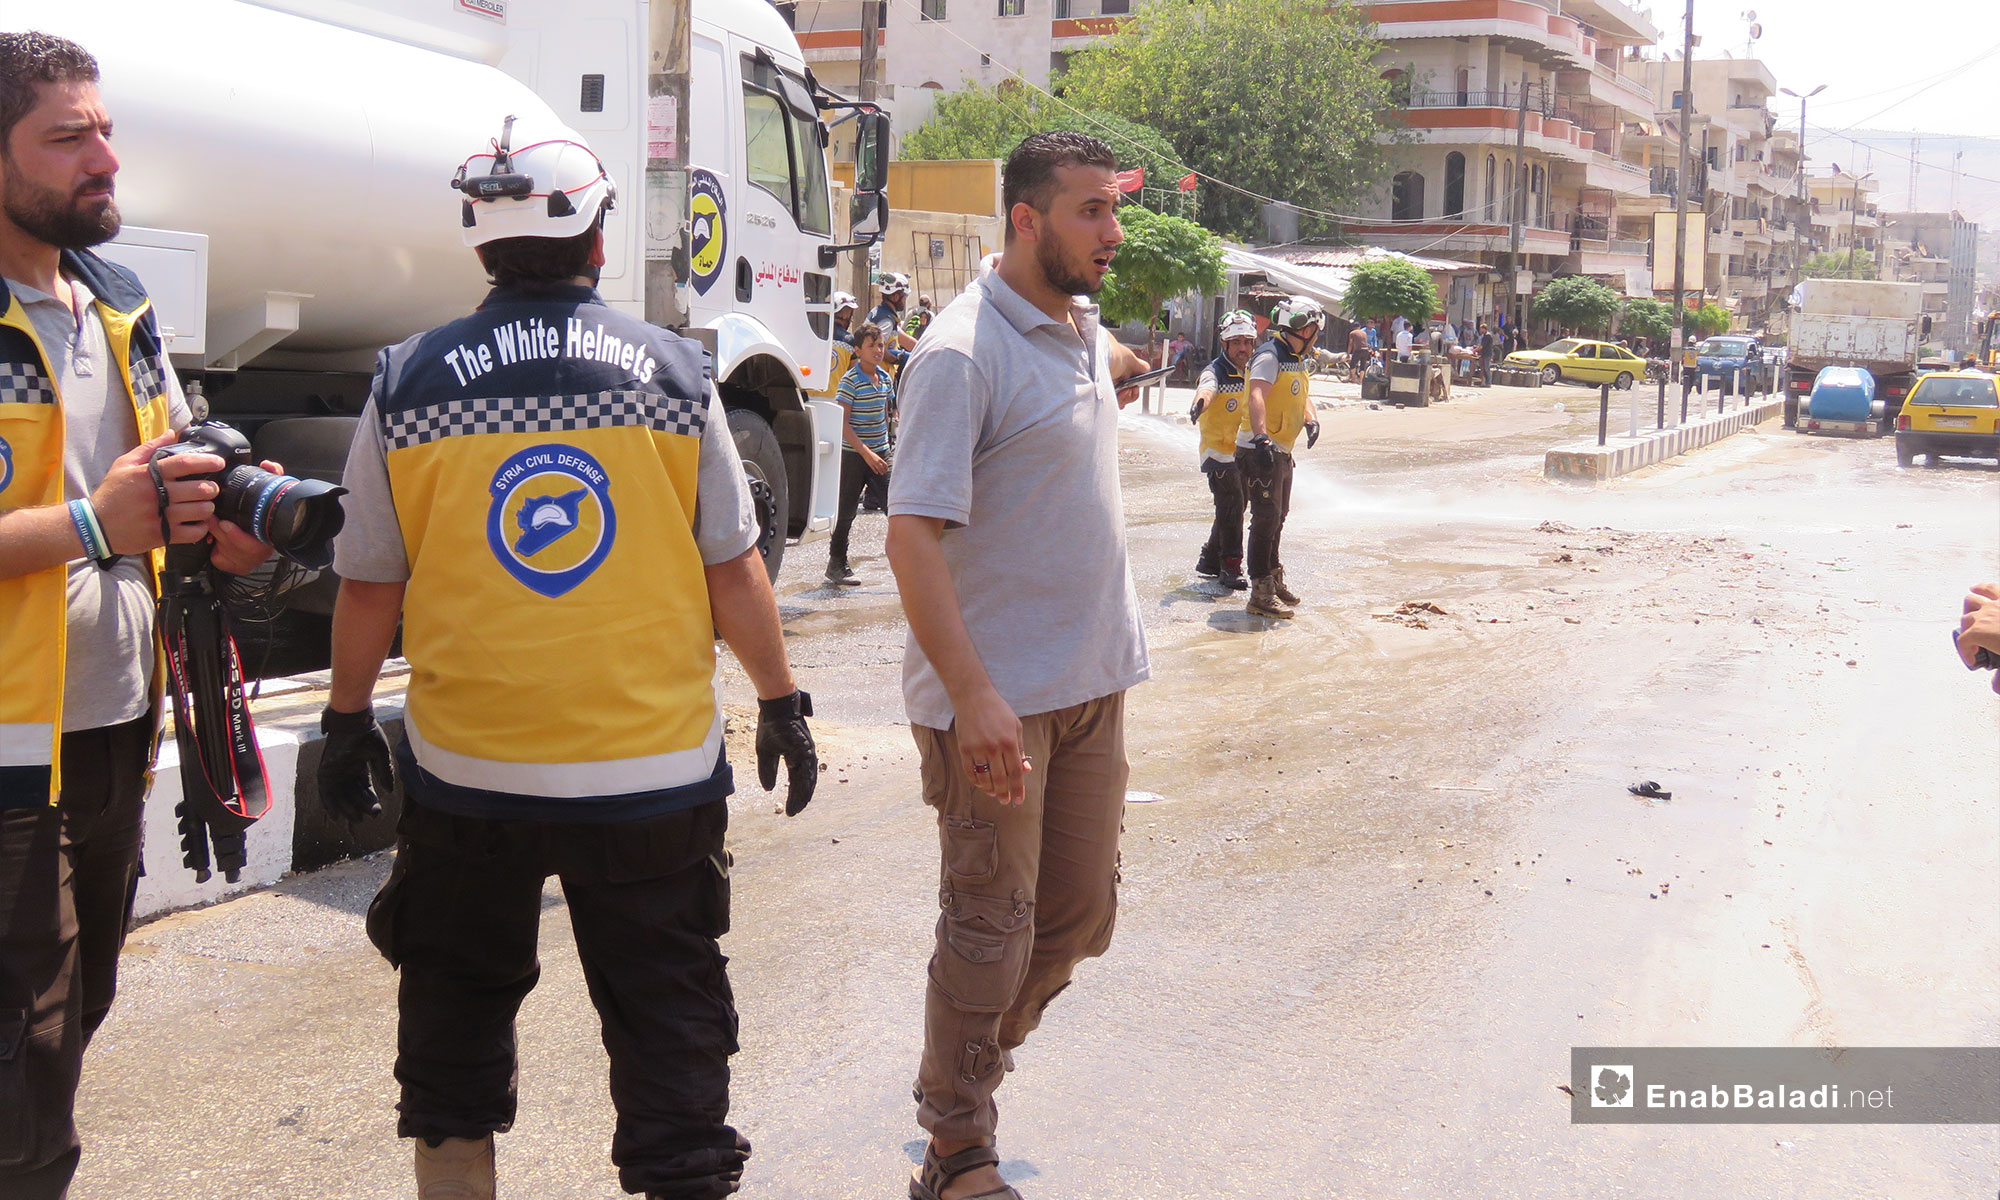   Civil Defense members in a campaign for the rehabilitation of roads in Afrin city – August 1, 2018 (Enab Baladi)